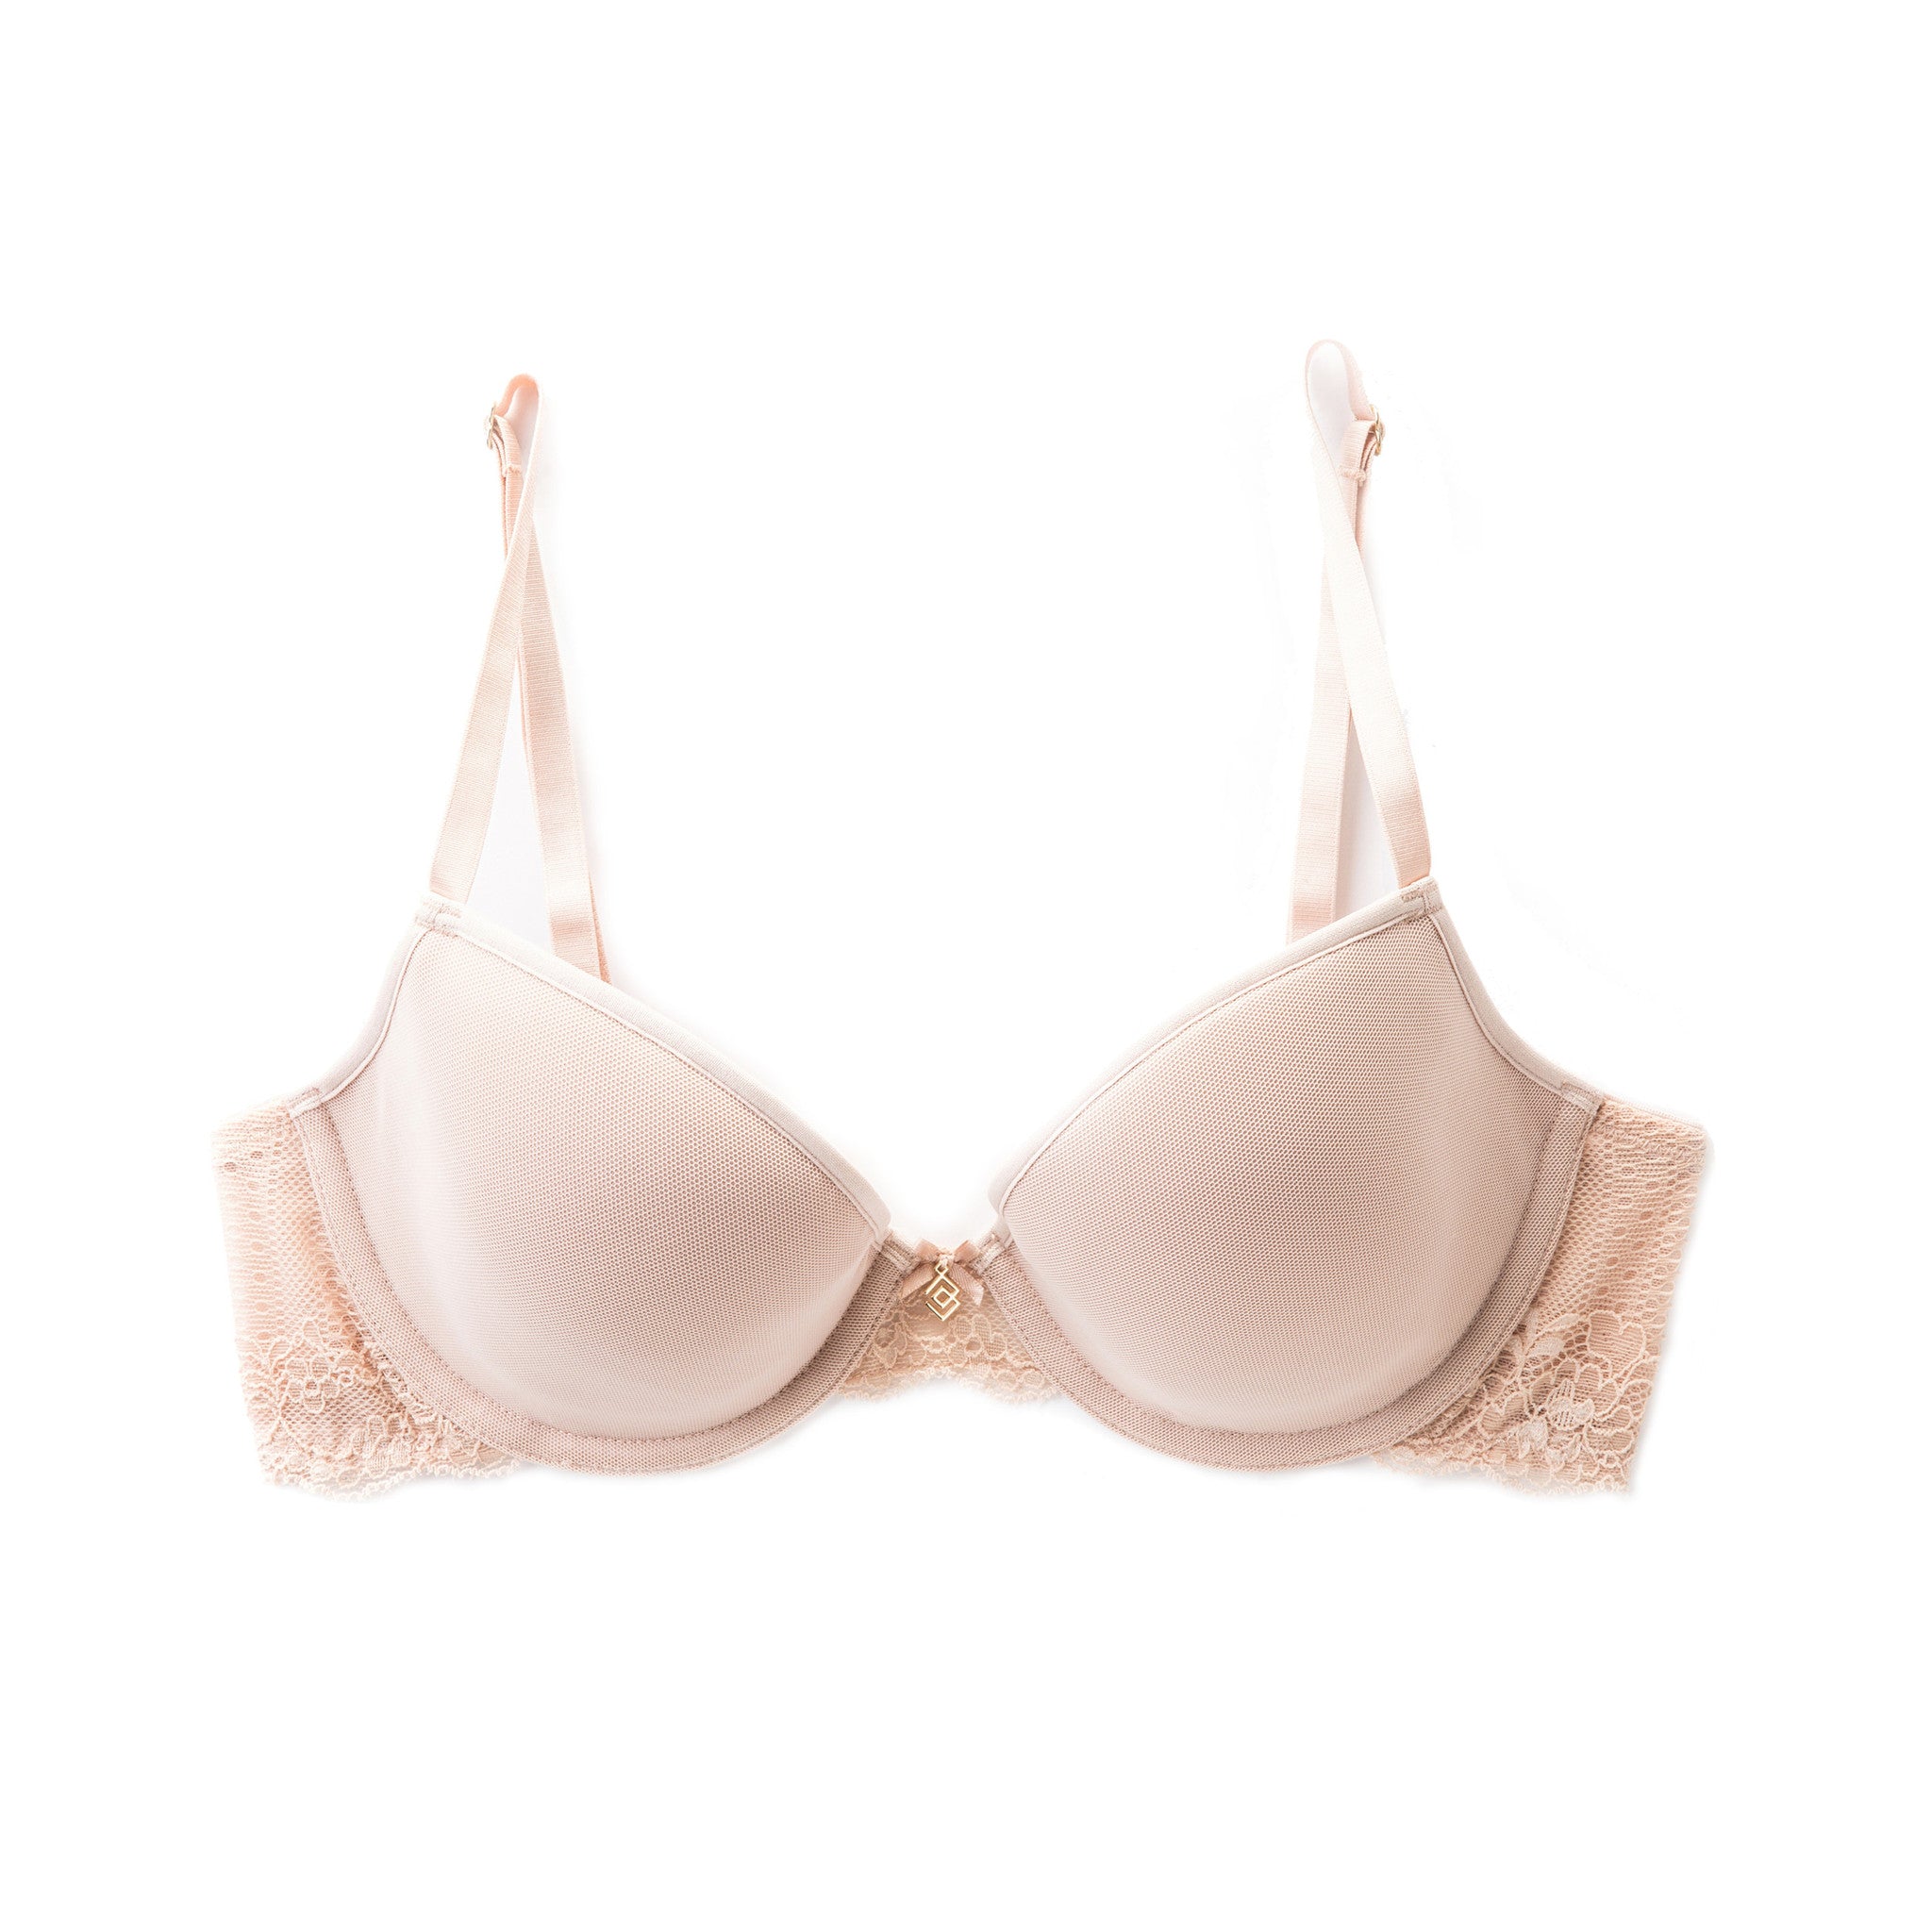 Feather Spacer Bra in Nude (34B) from ThirdLove